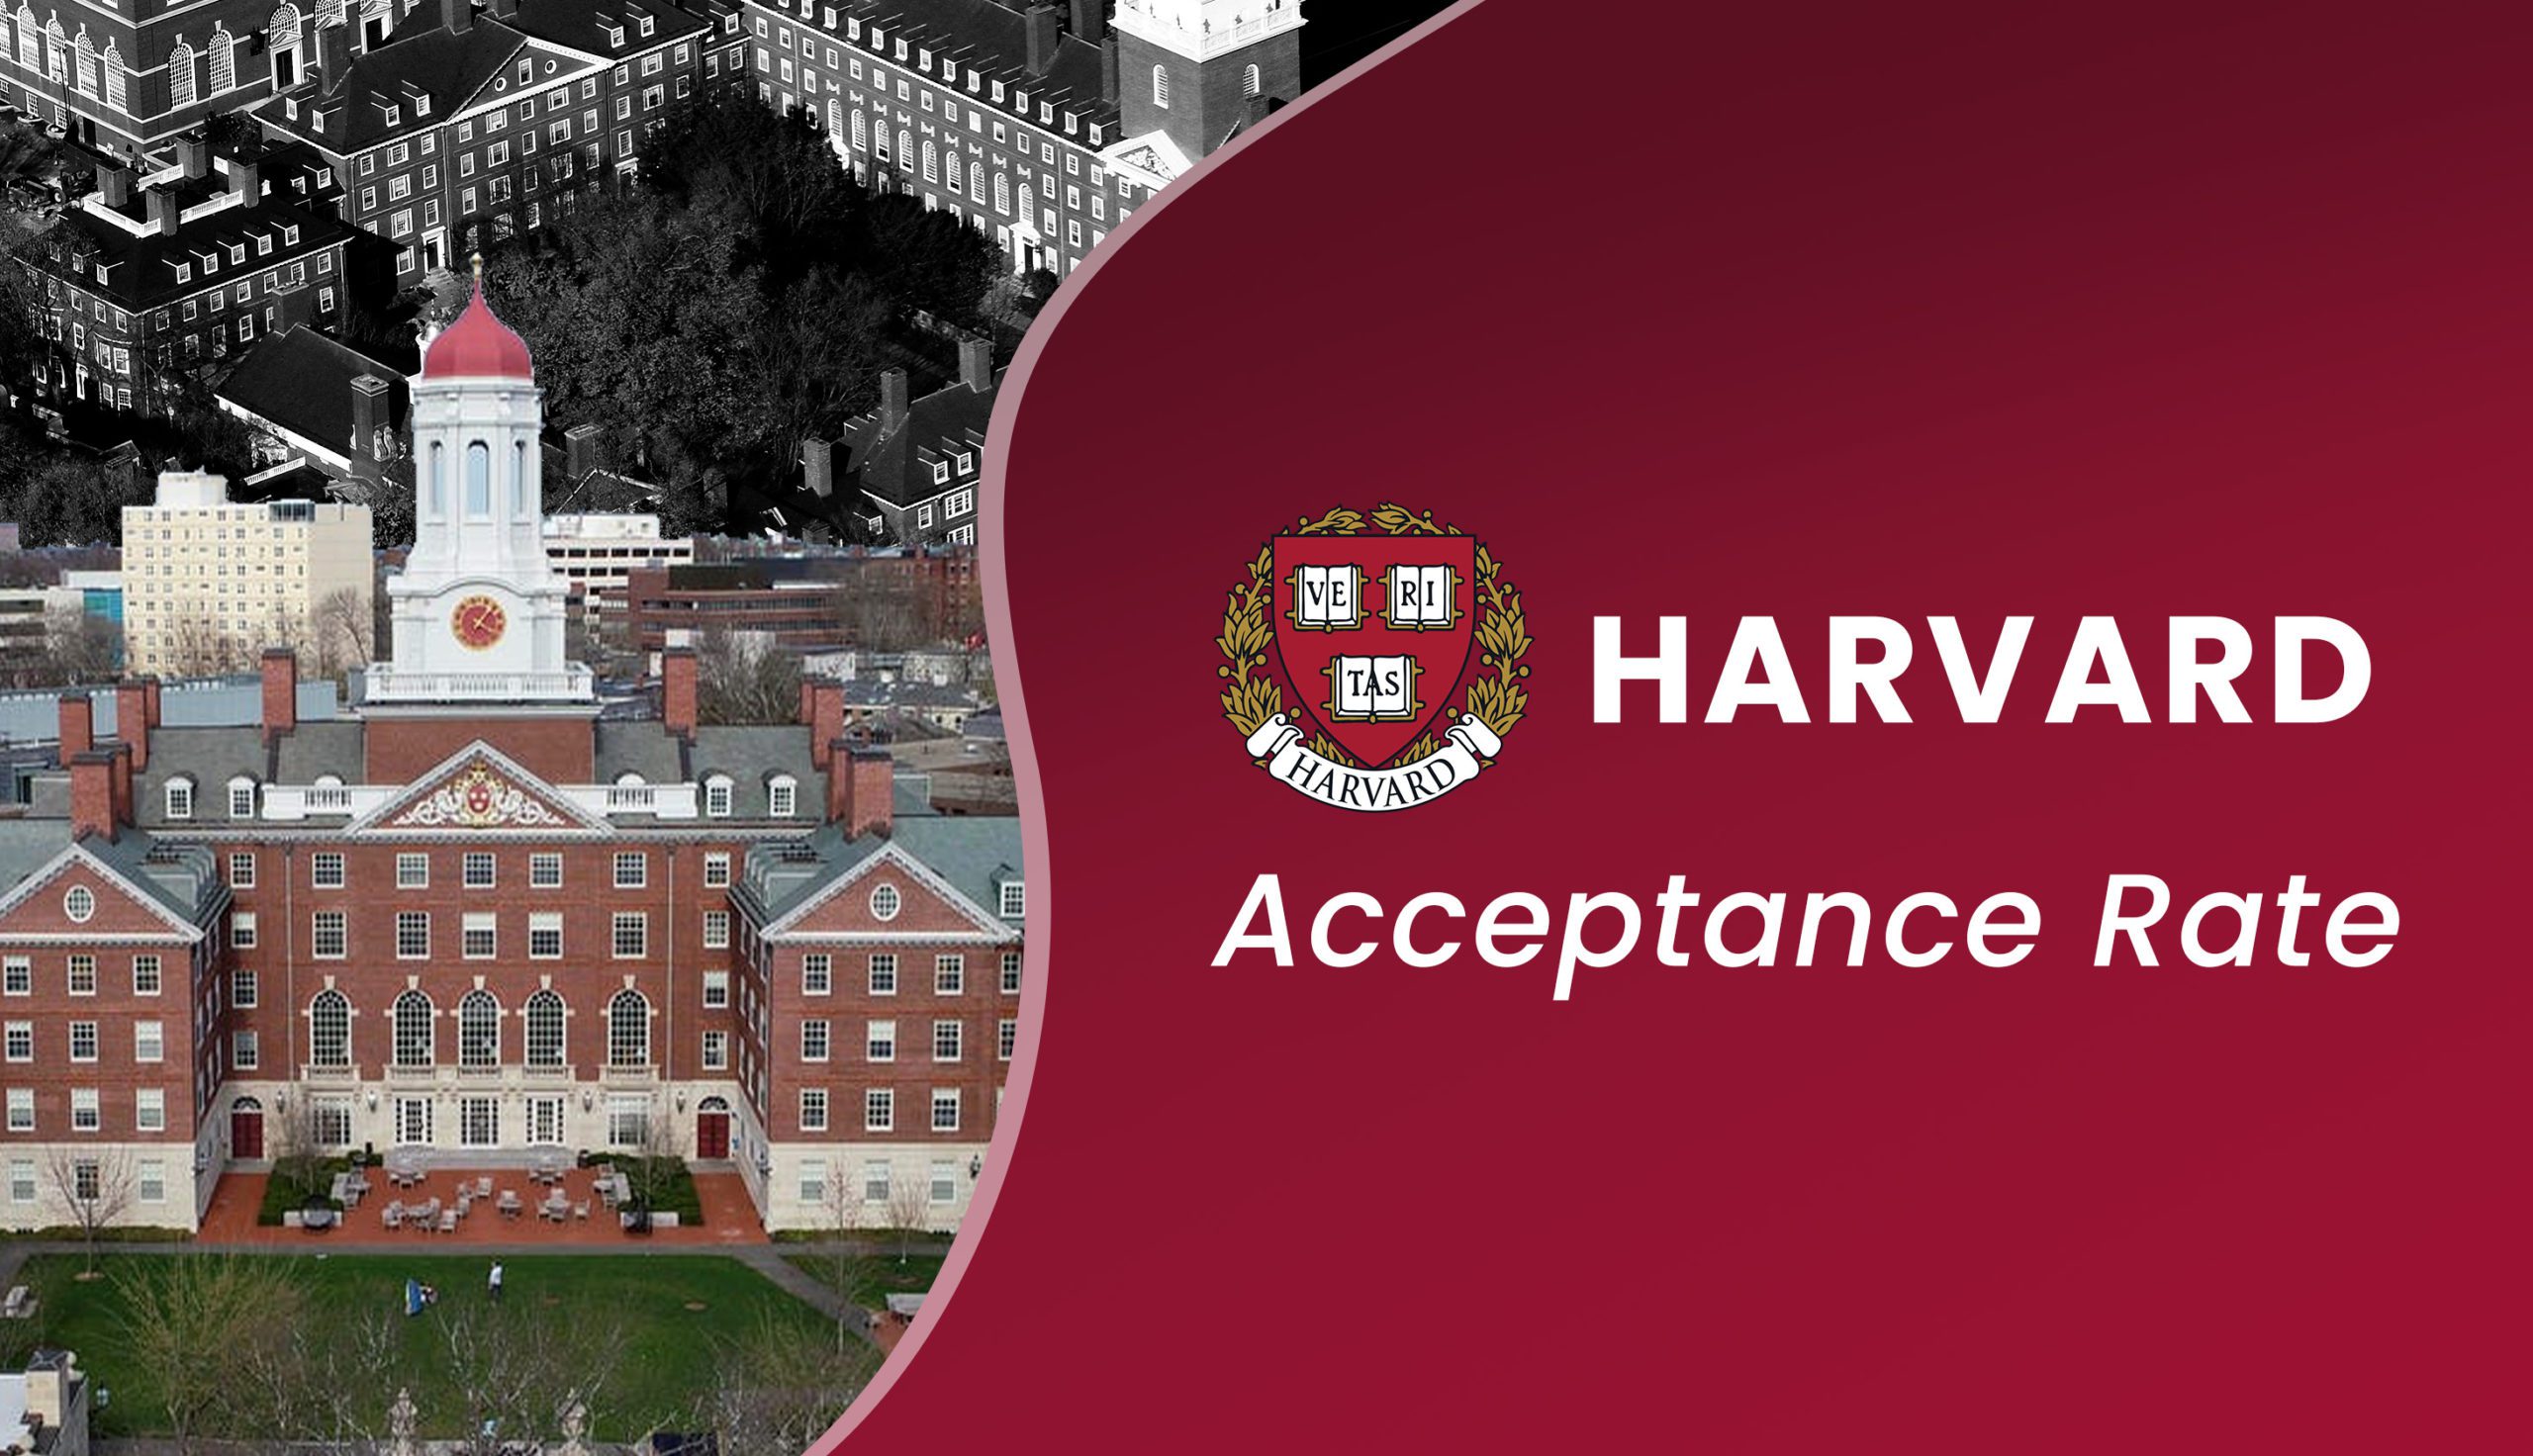 Harvard Acceptance Rate Admission Requirements & Tuition 2023 Geetra